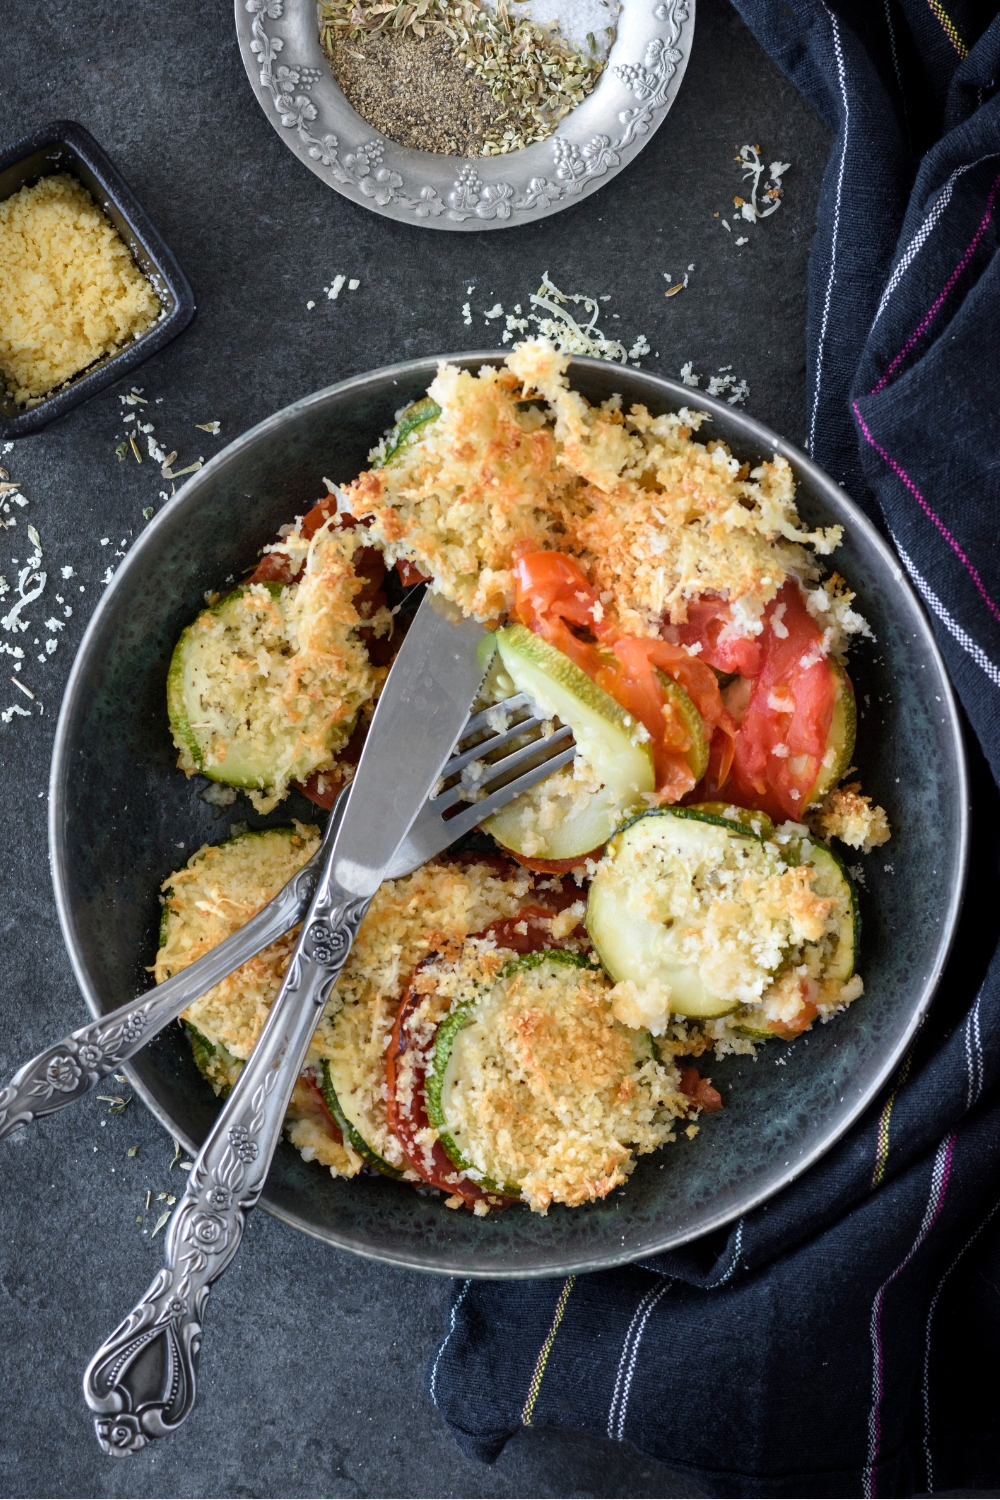 A bowl with zucchini tomato casserole and a fork and knife.